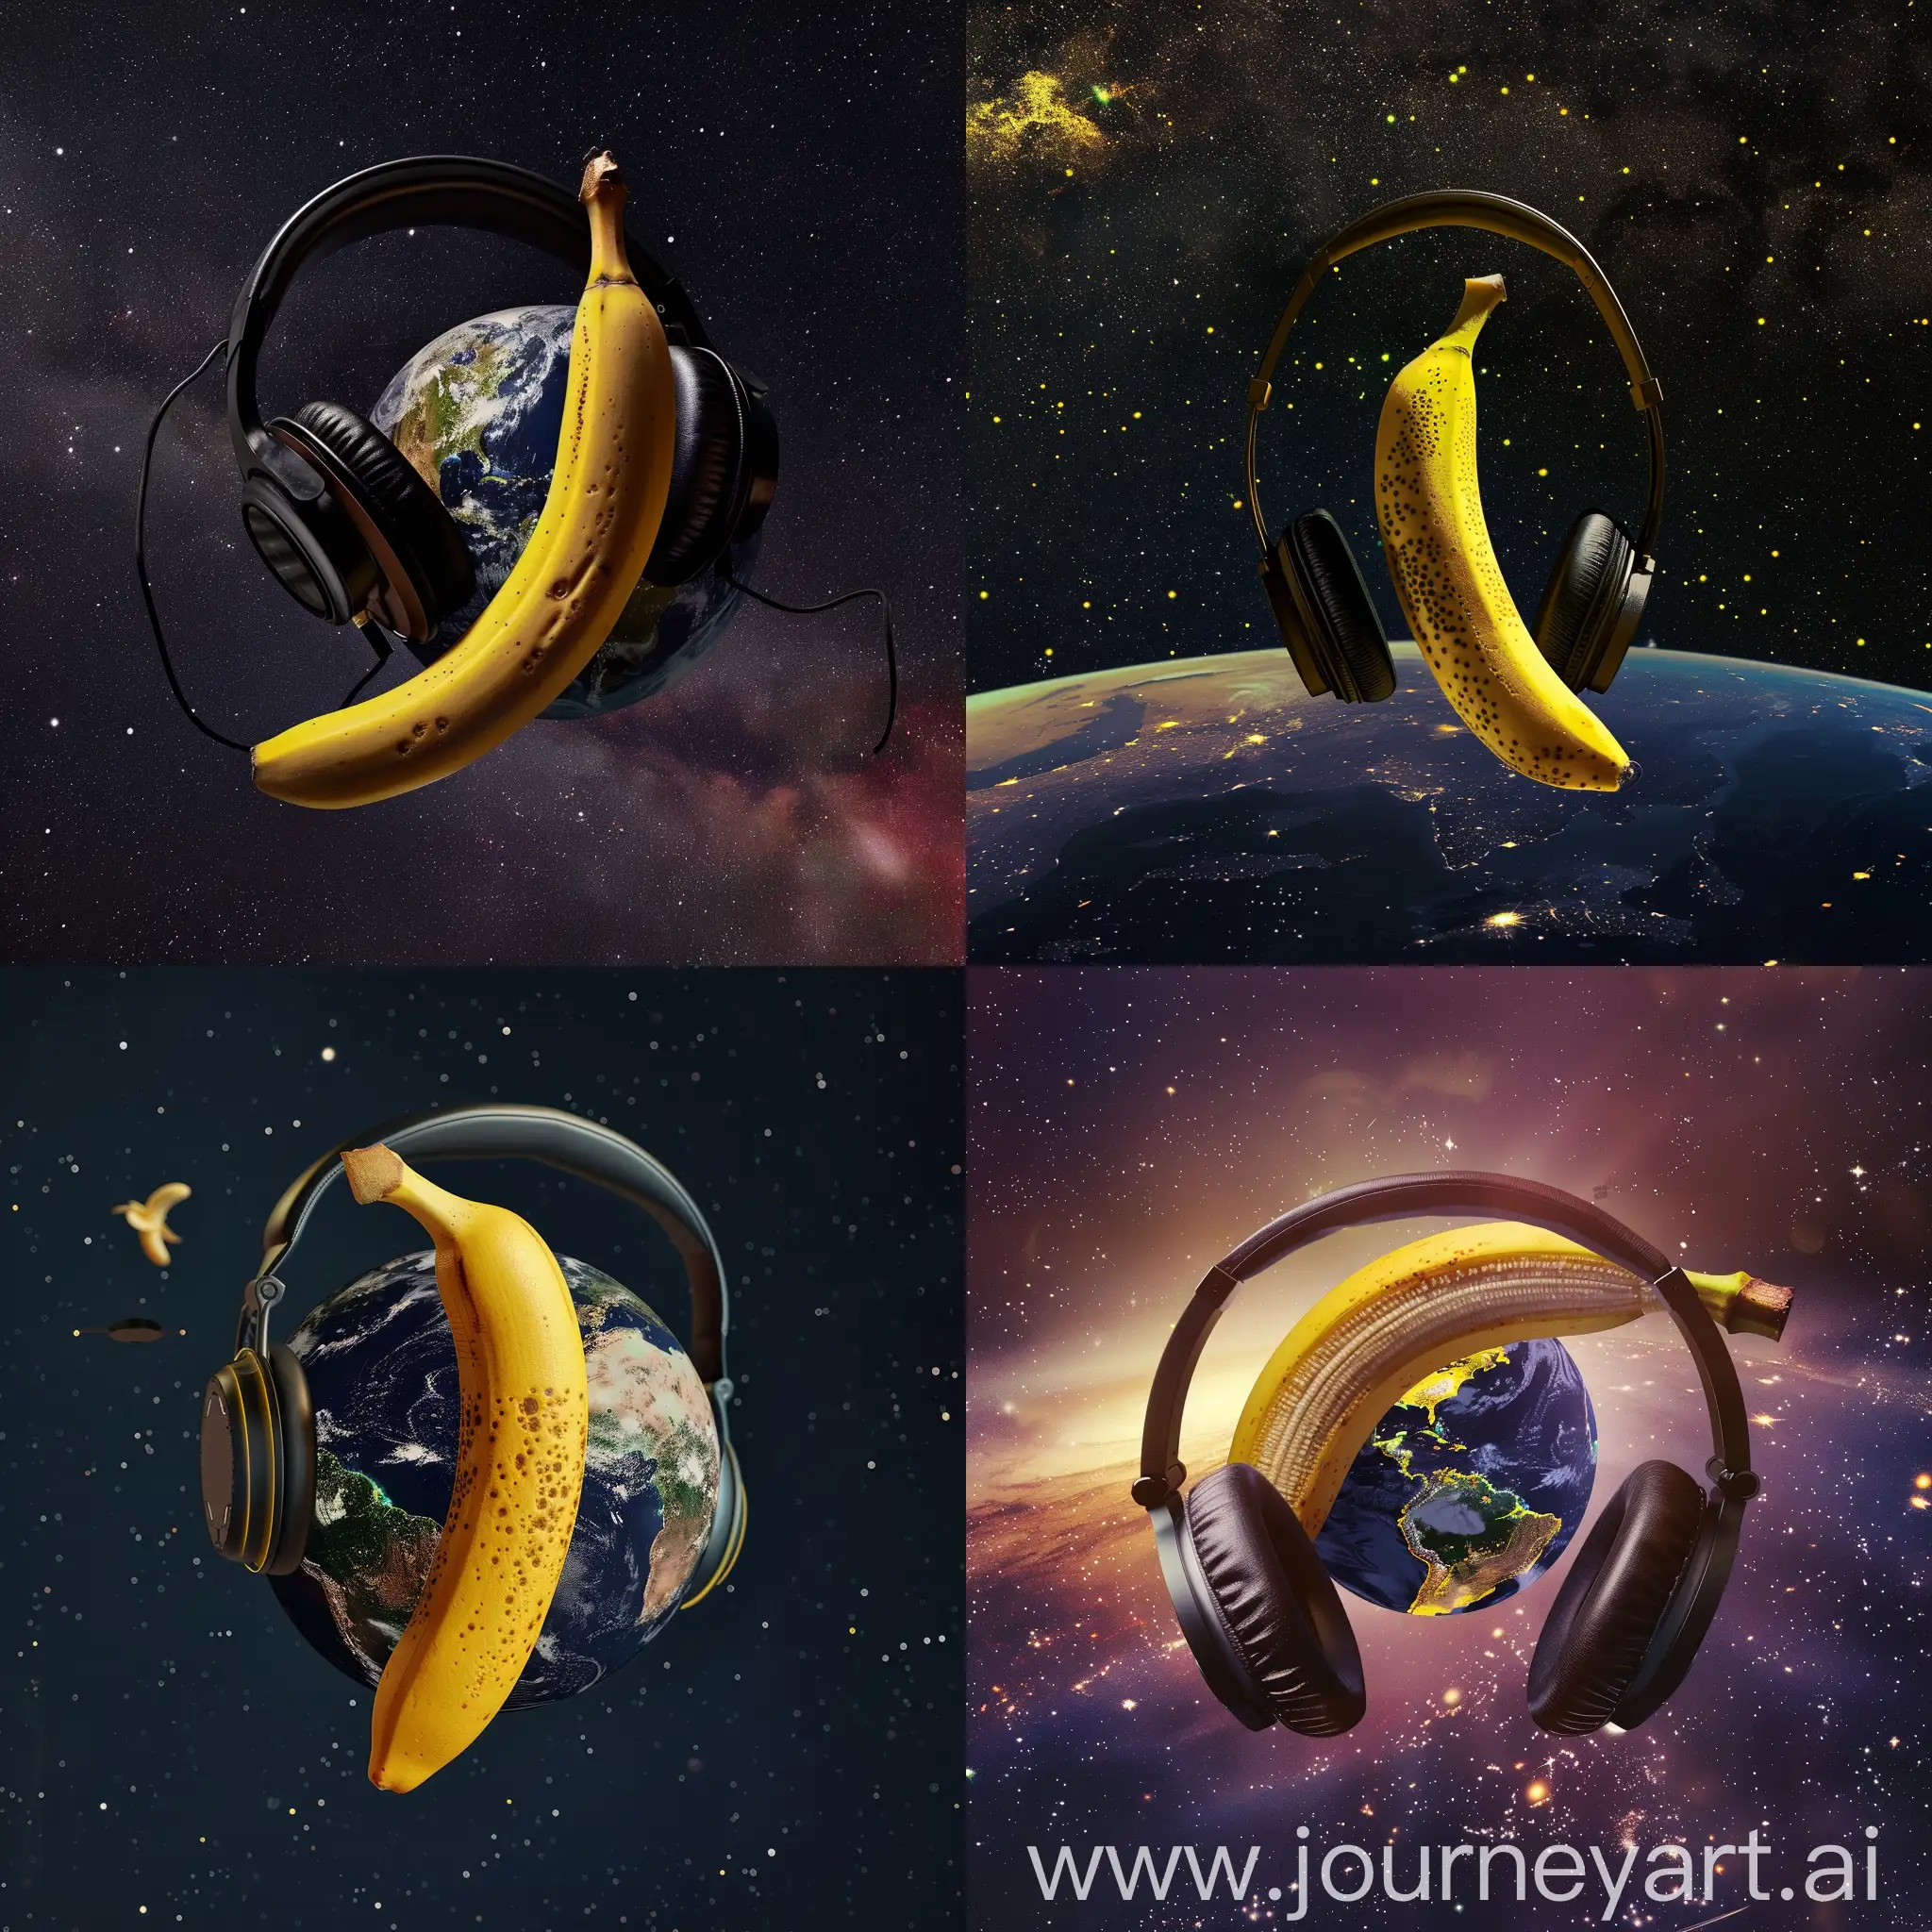 Photorealistic-Banana-in-Space-with-Earth-Background-and-Headphones